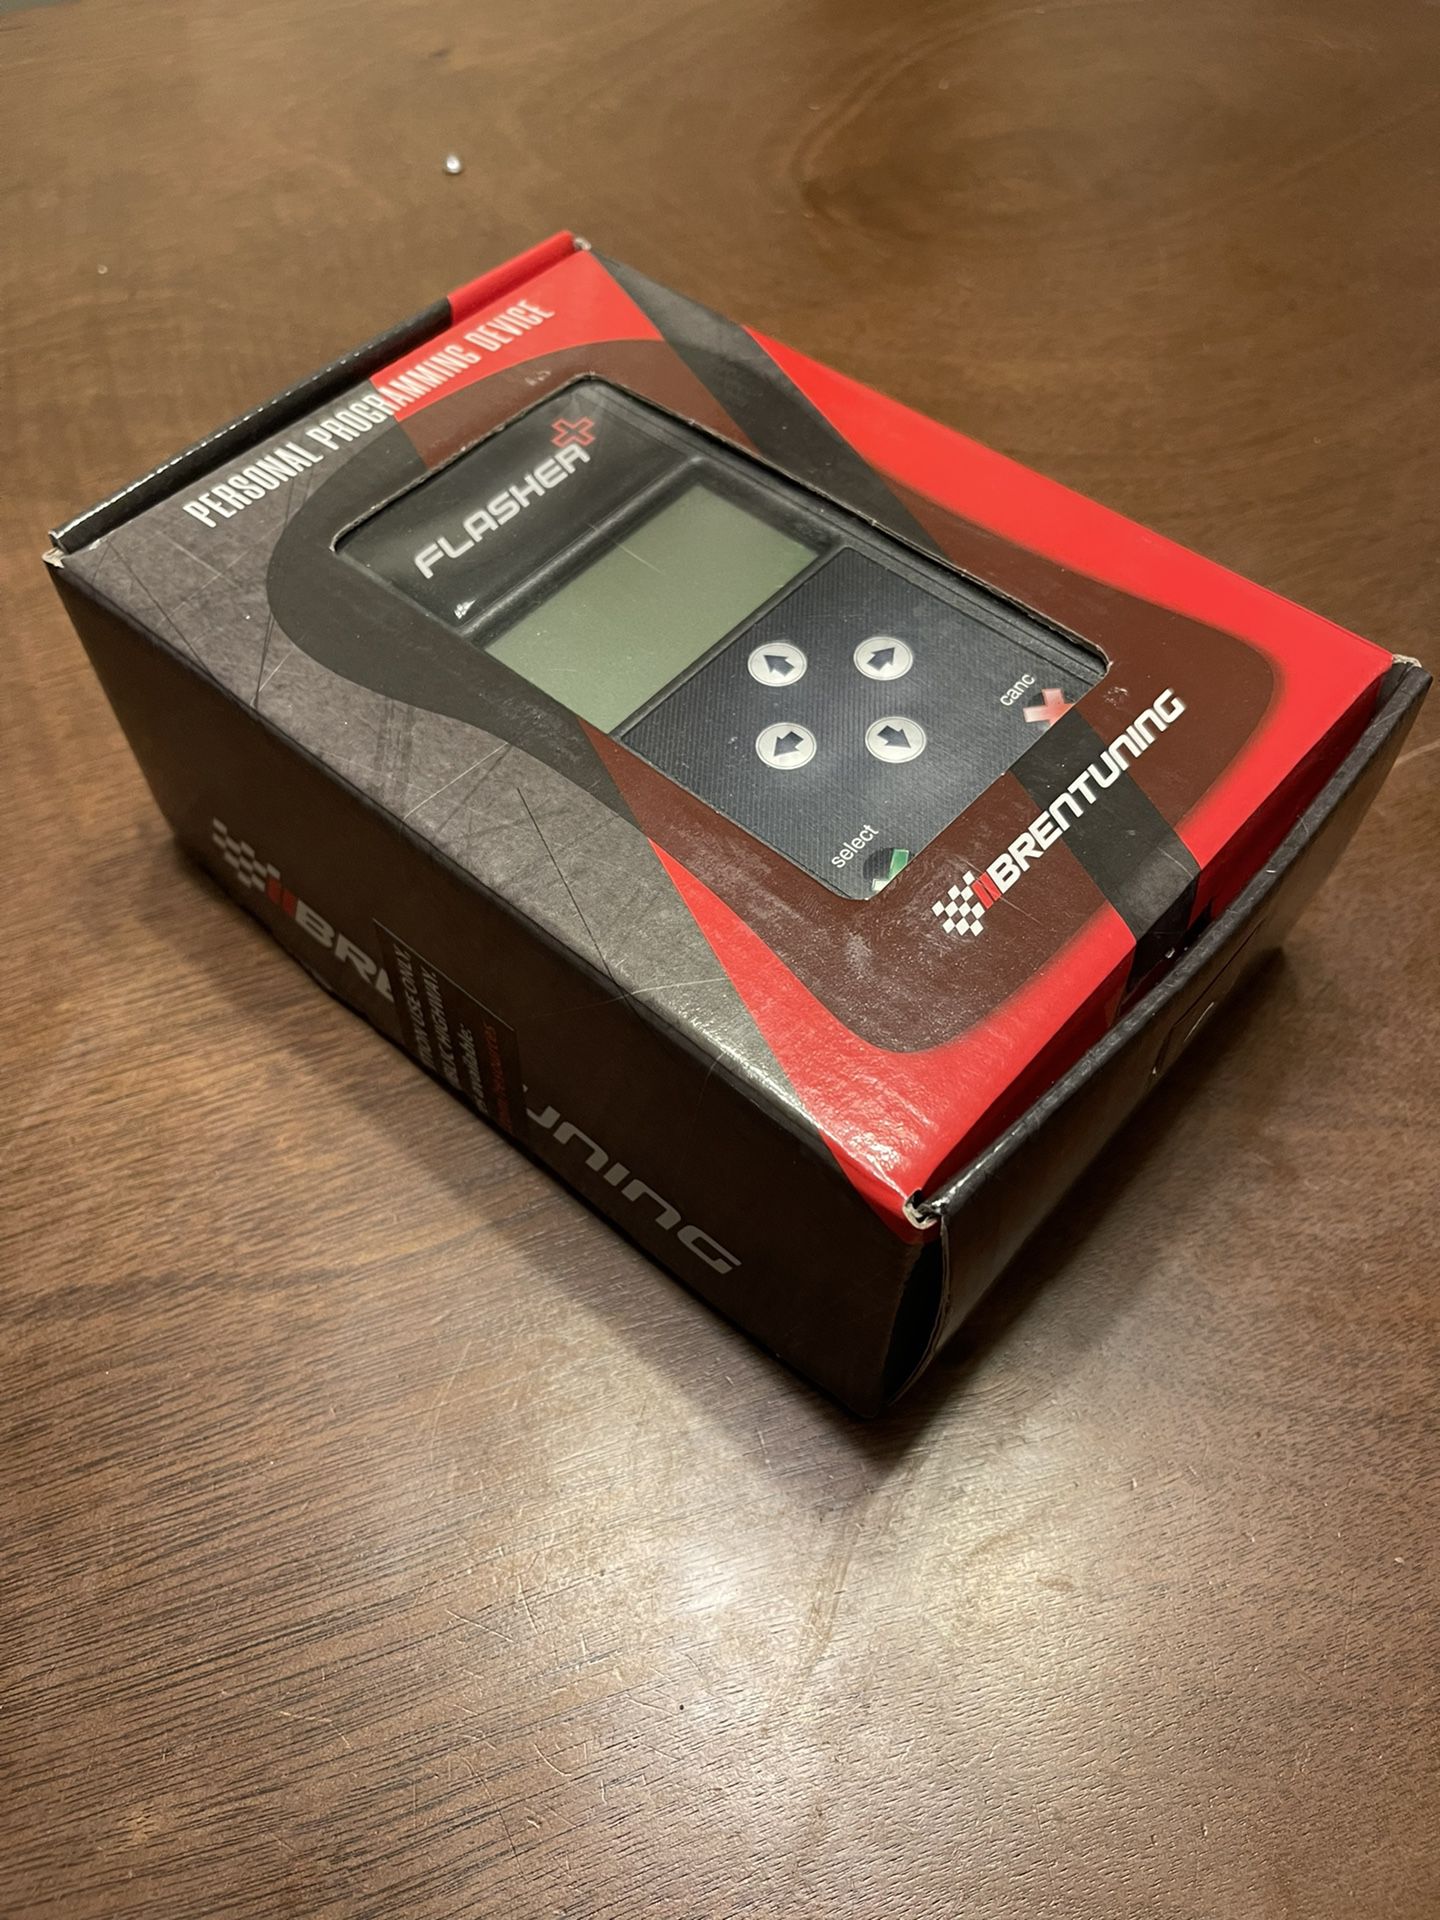 Brentuning S1000RR Stage 2 Flash With Handheld Tuner